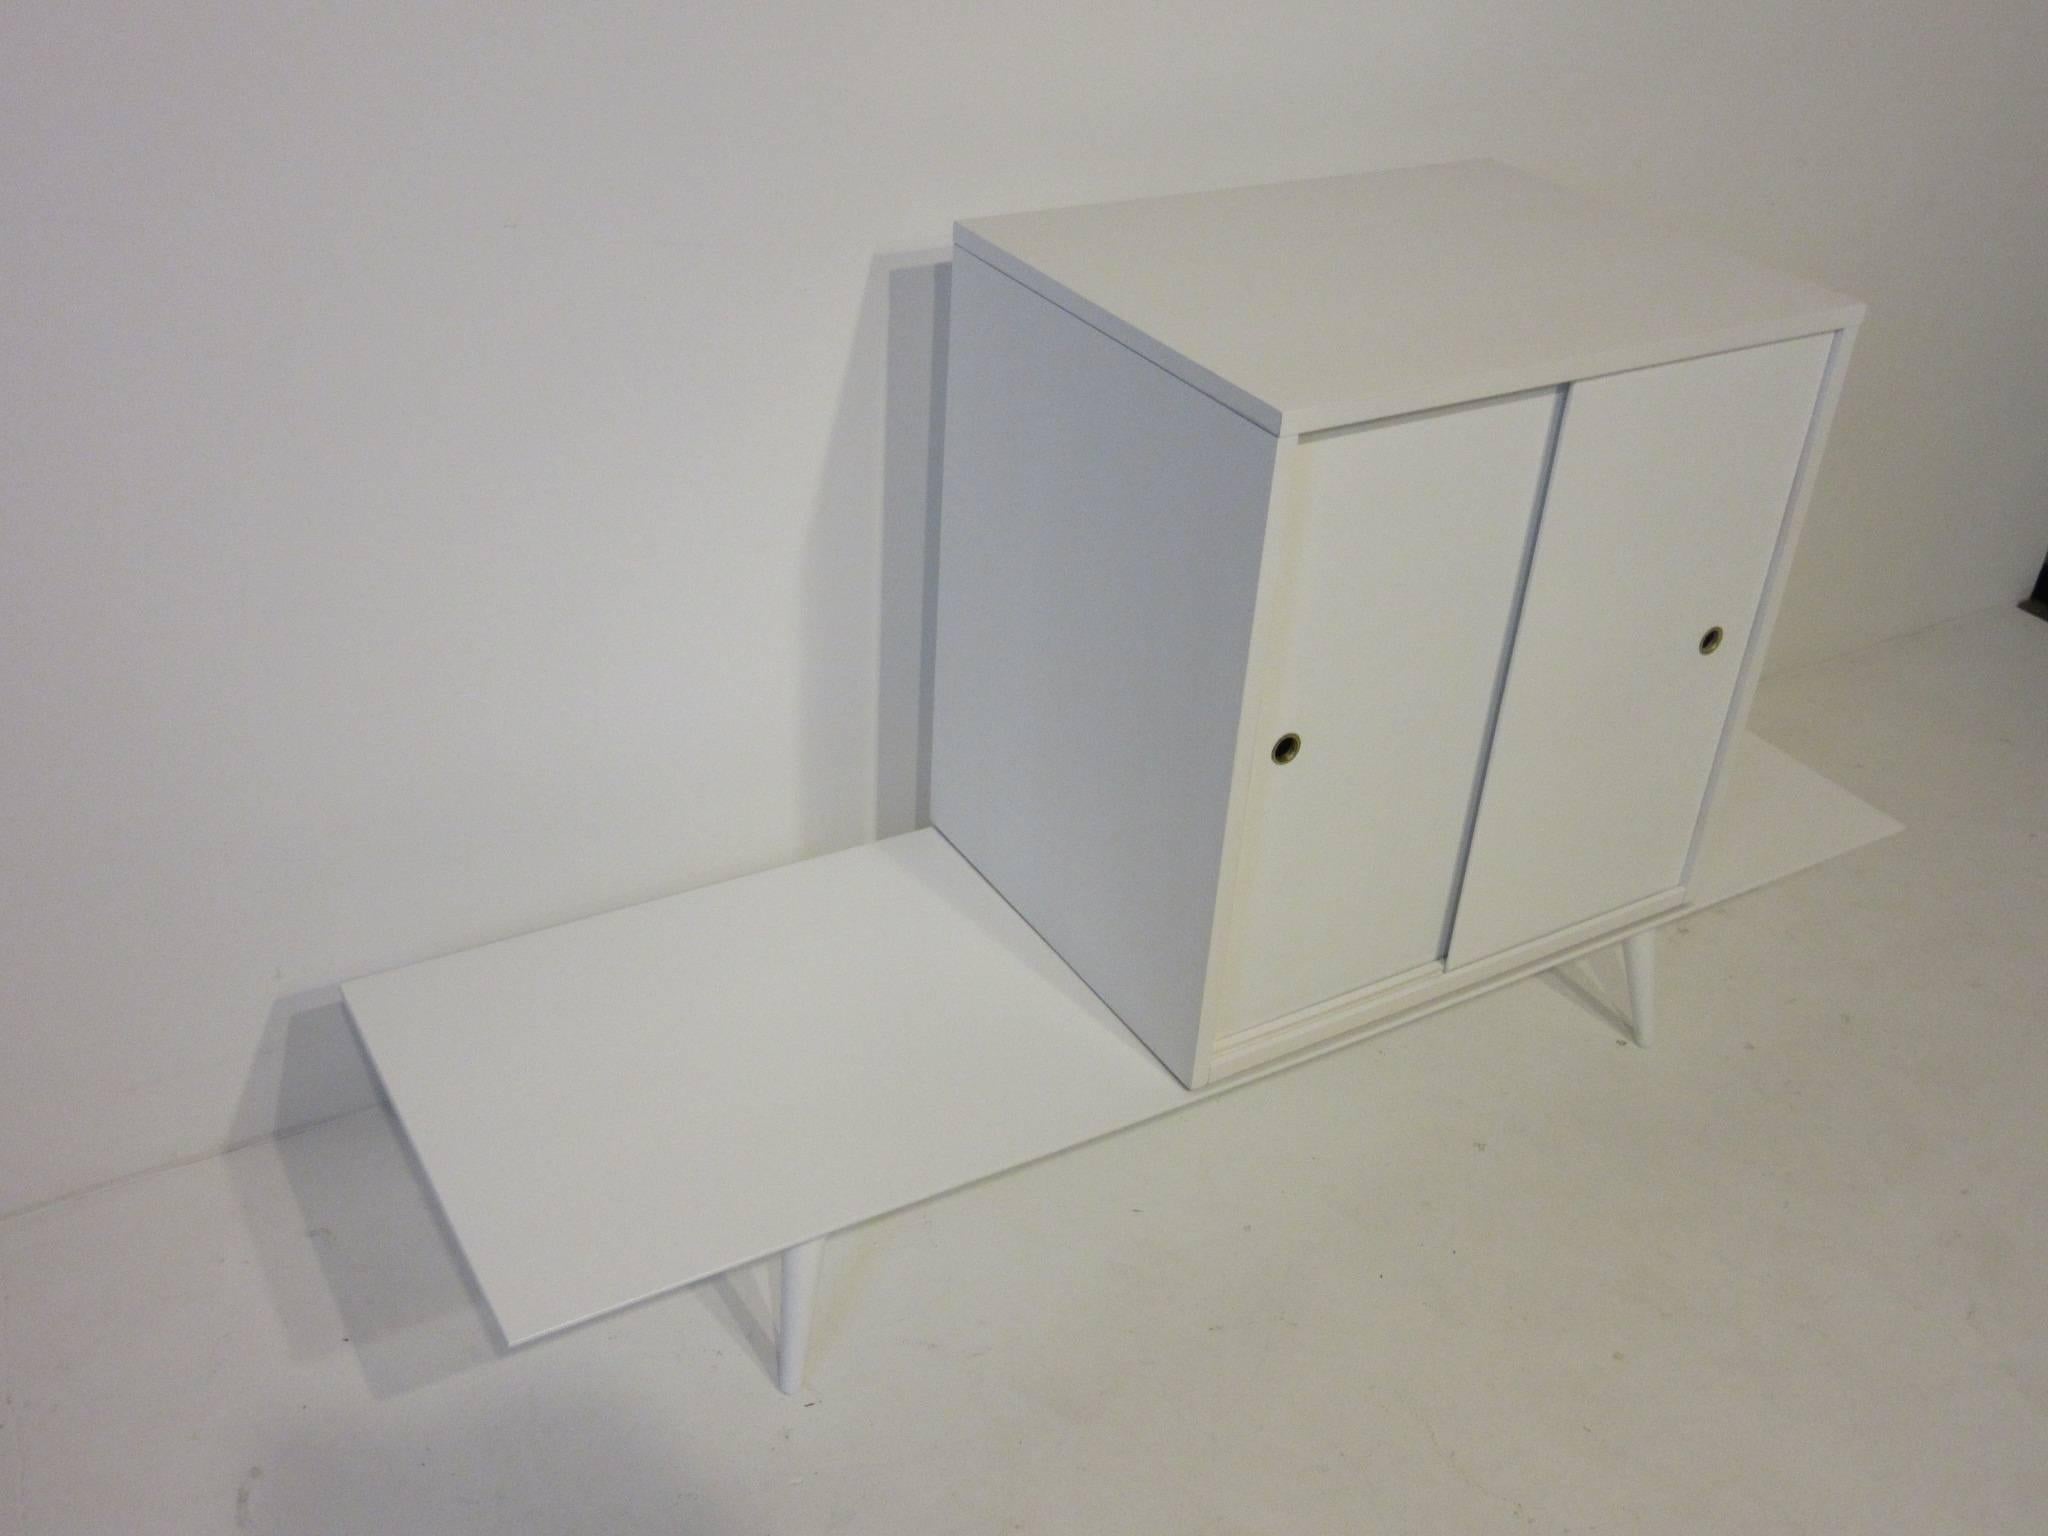 A two-piece Paul McCobb sliding door cabinet on bench with brass pull hole surrounds, conical legs and retaining the manufactures labels. Constructed by the factory in a rare satin white finish which makes this set outstanding. From the Planner